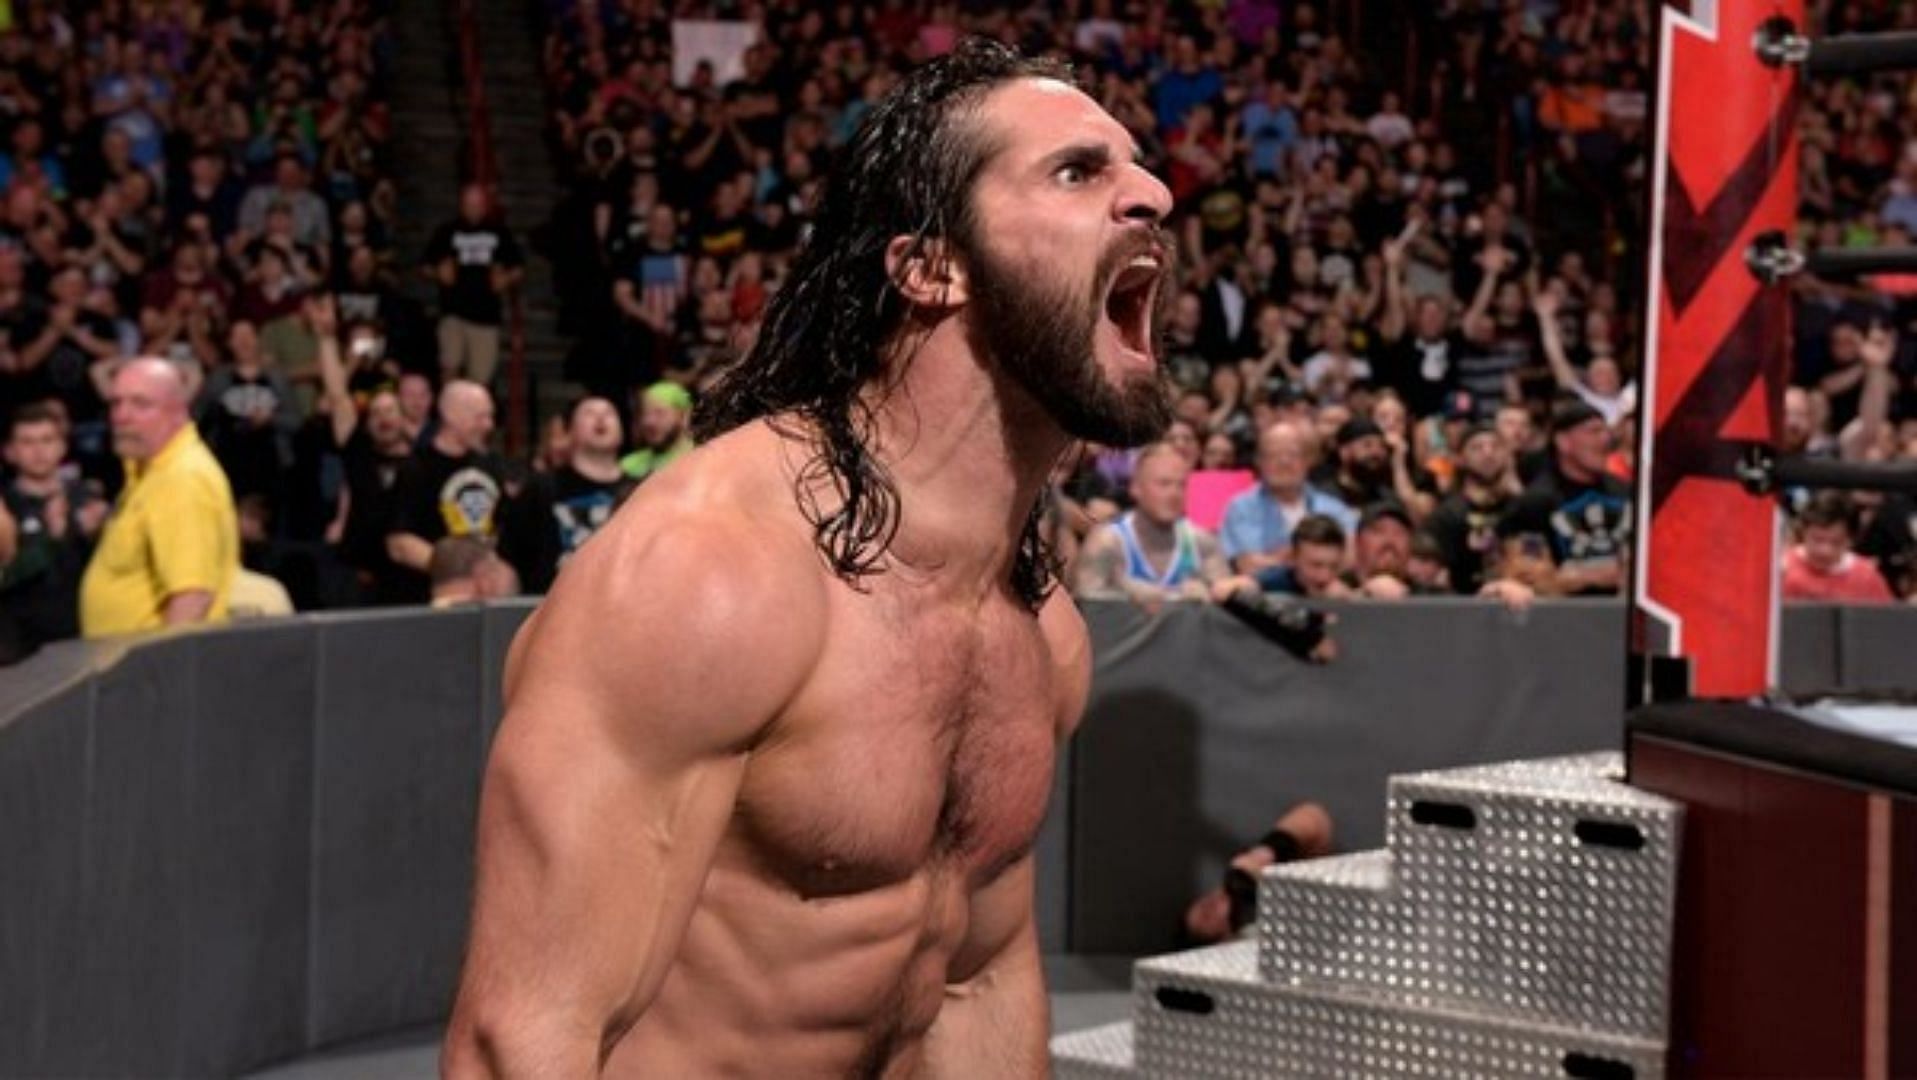 Seth Rollins has one of the most anticipated matches on the SummerSlam card